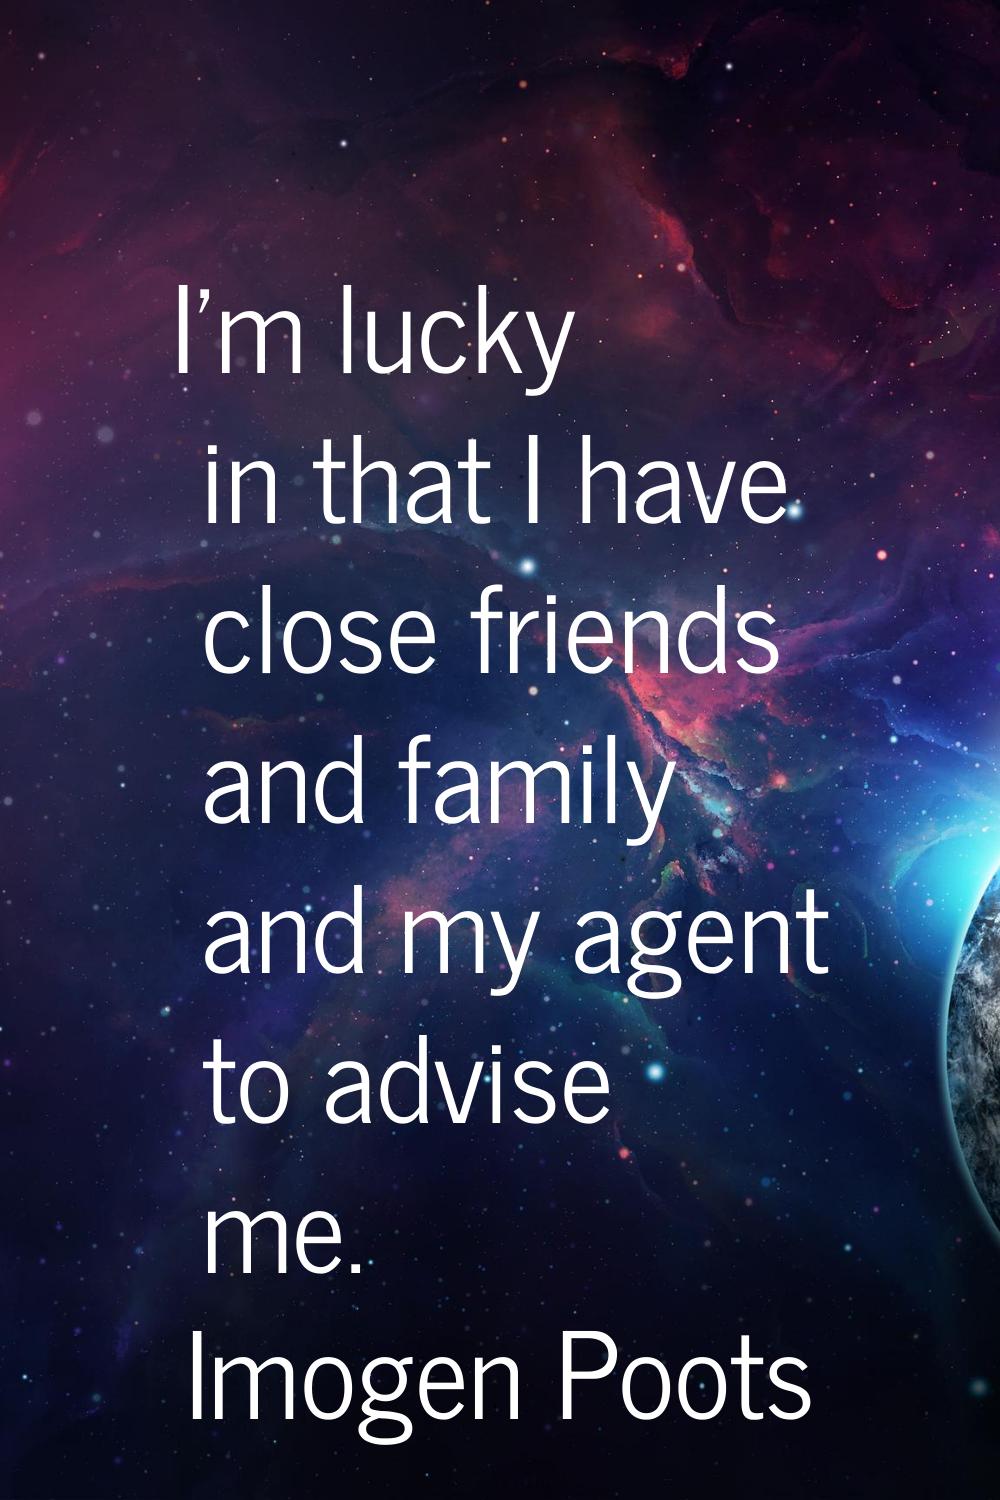 I'm lucky in that I have close friends and family and my agent to advise me.